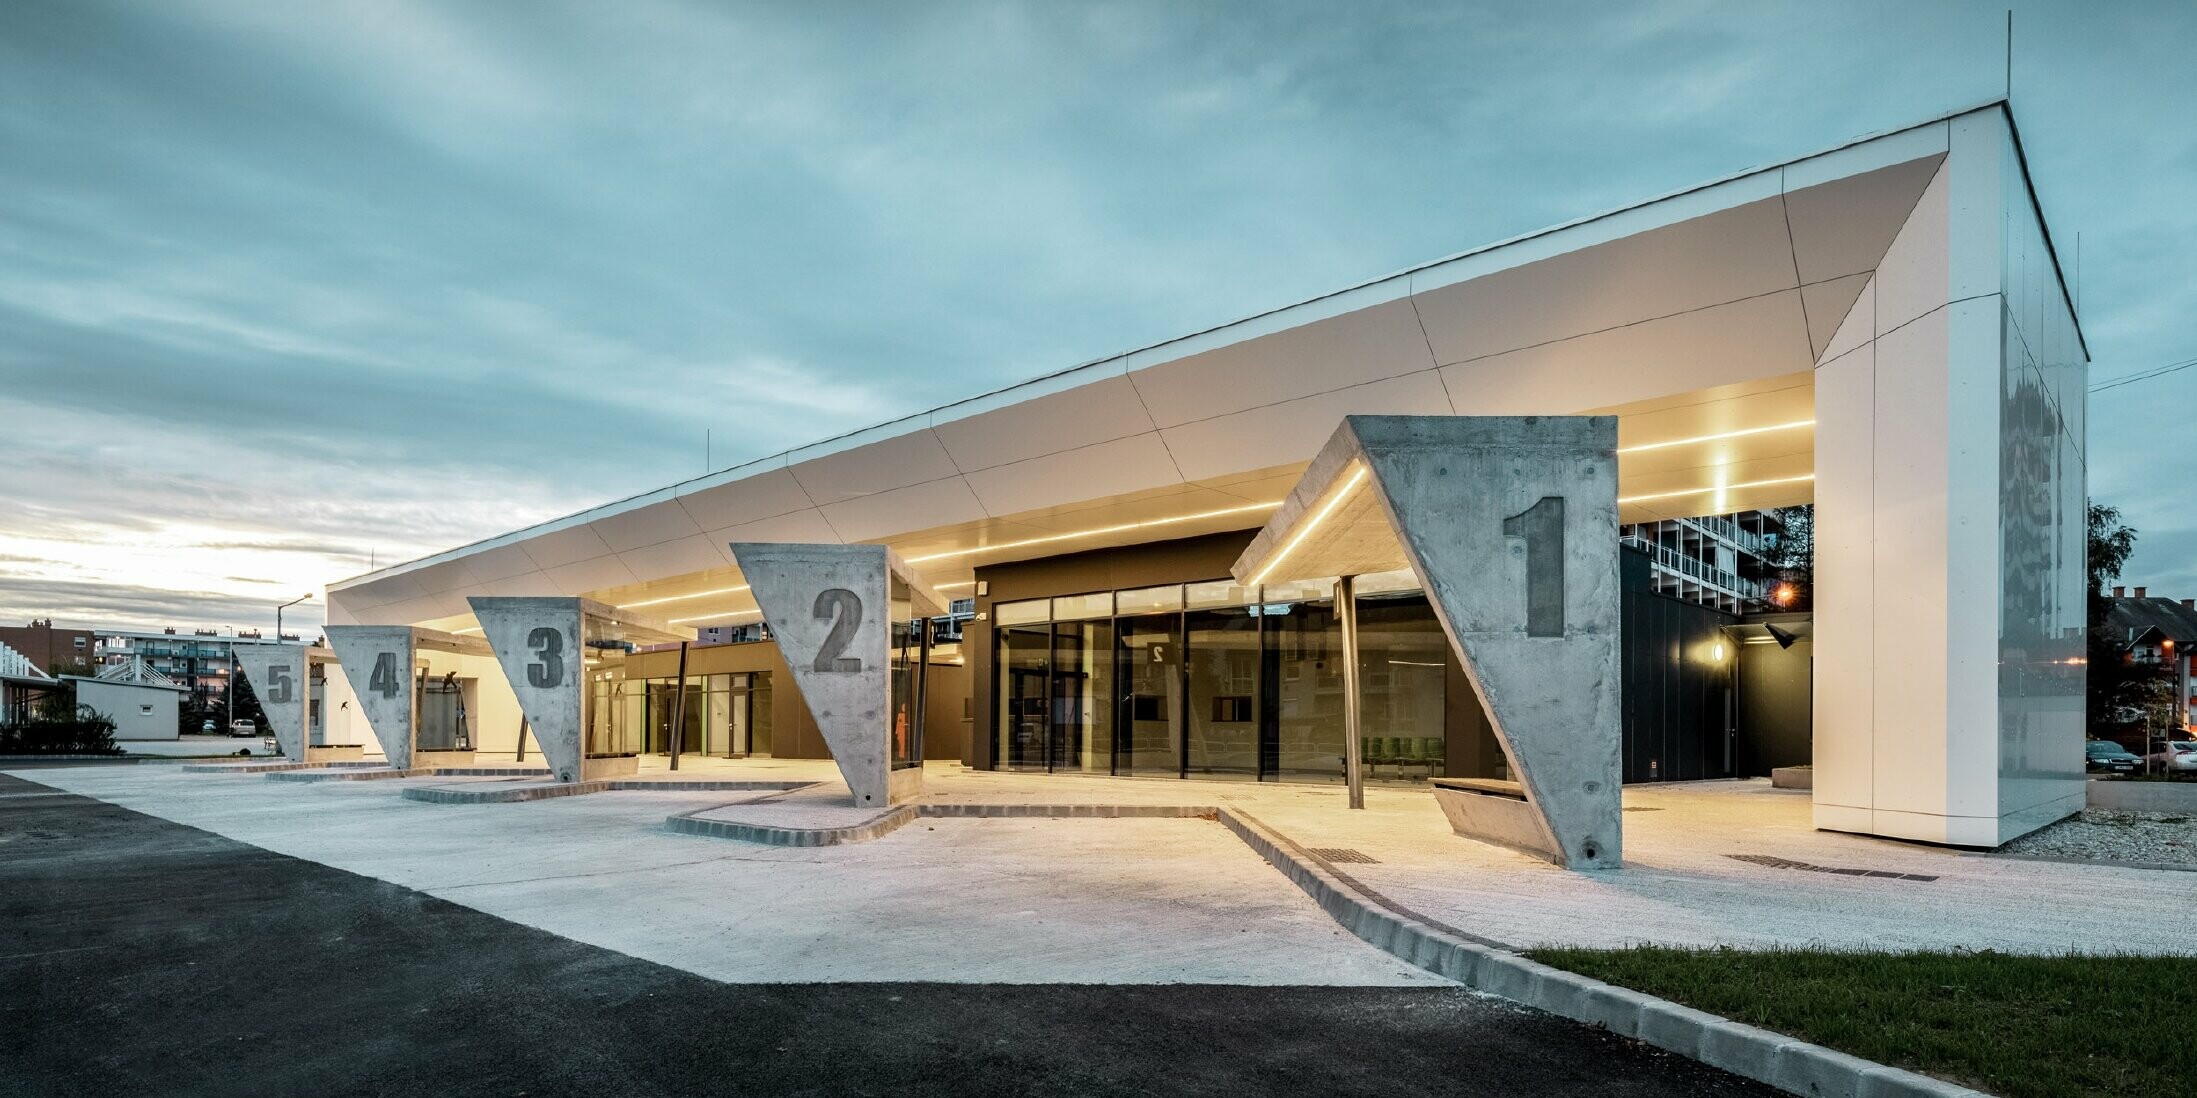 Modern bus station in Lenti, soffits are clad with PREFABOND aluminium composite panels in pure white